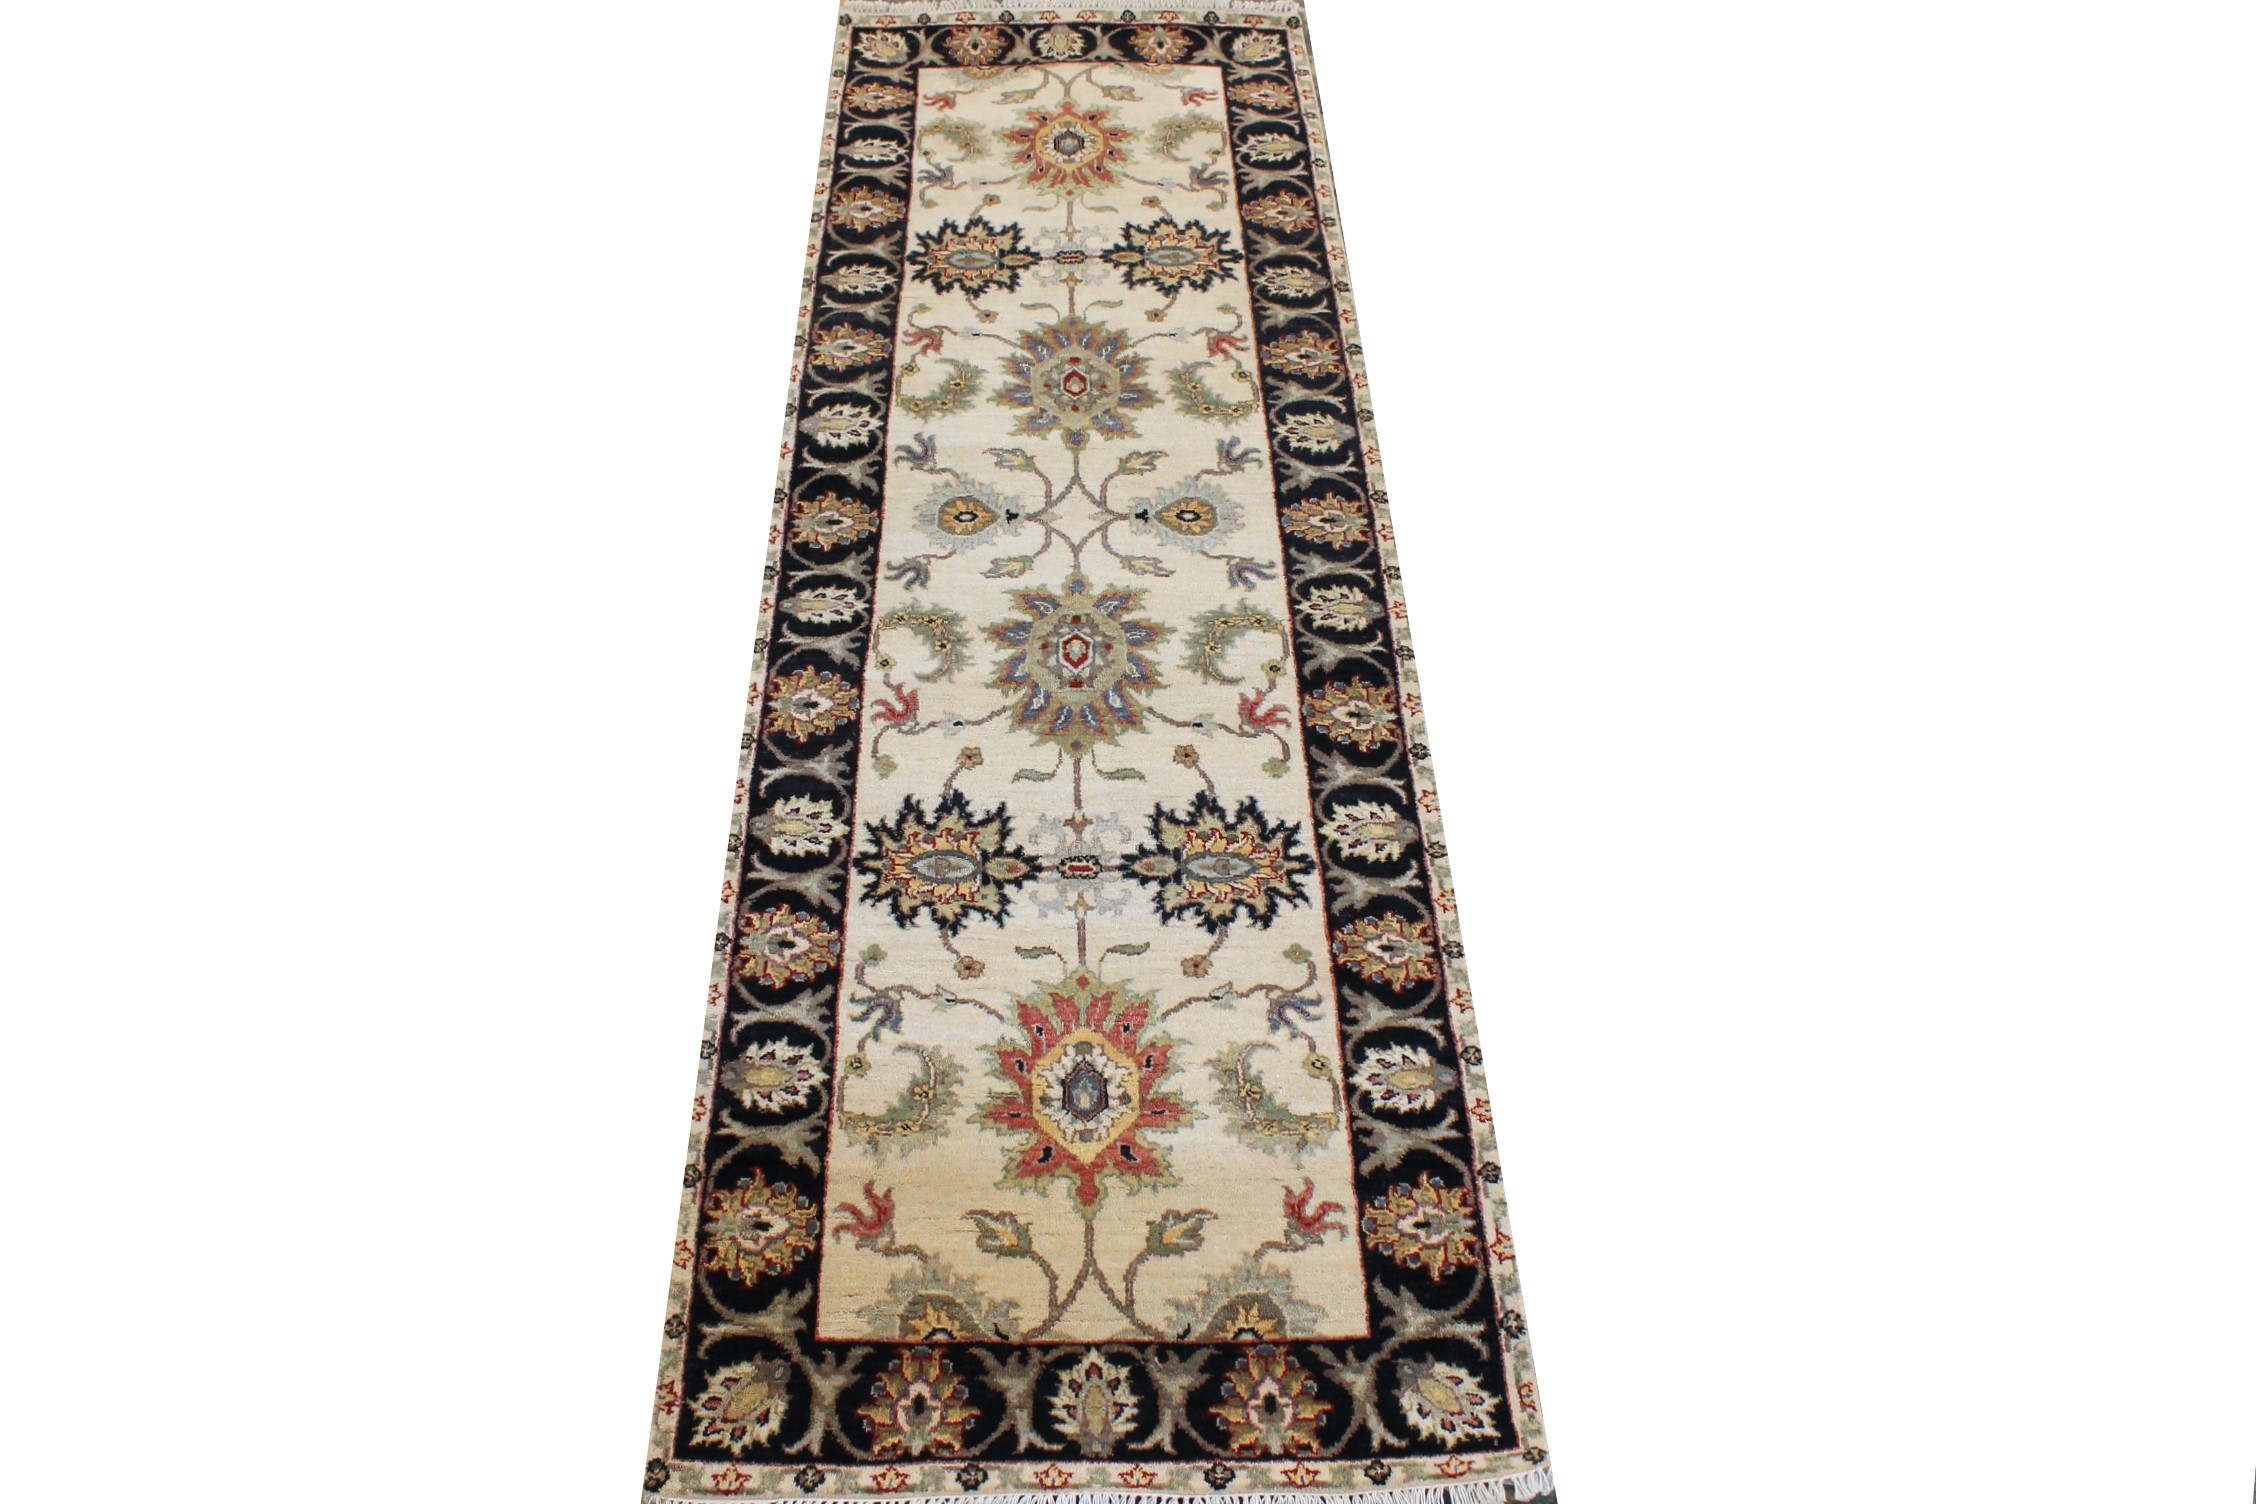 8 ft. Runner Traditional Hand Knotted Wool Area Rug - MR026470